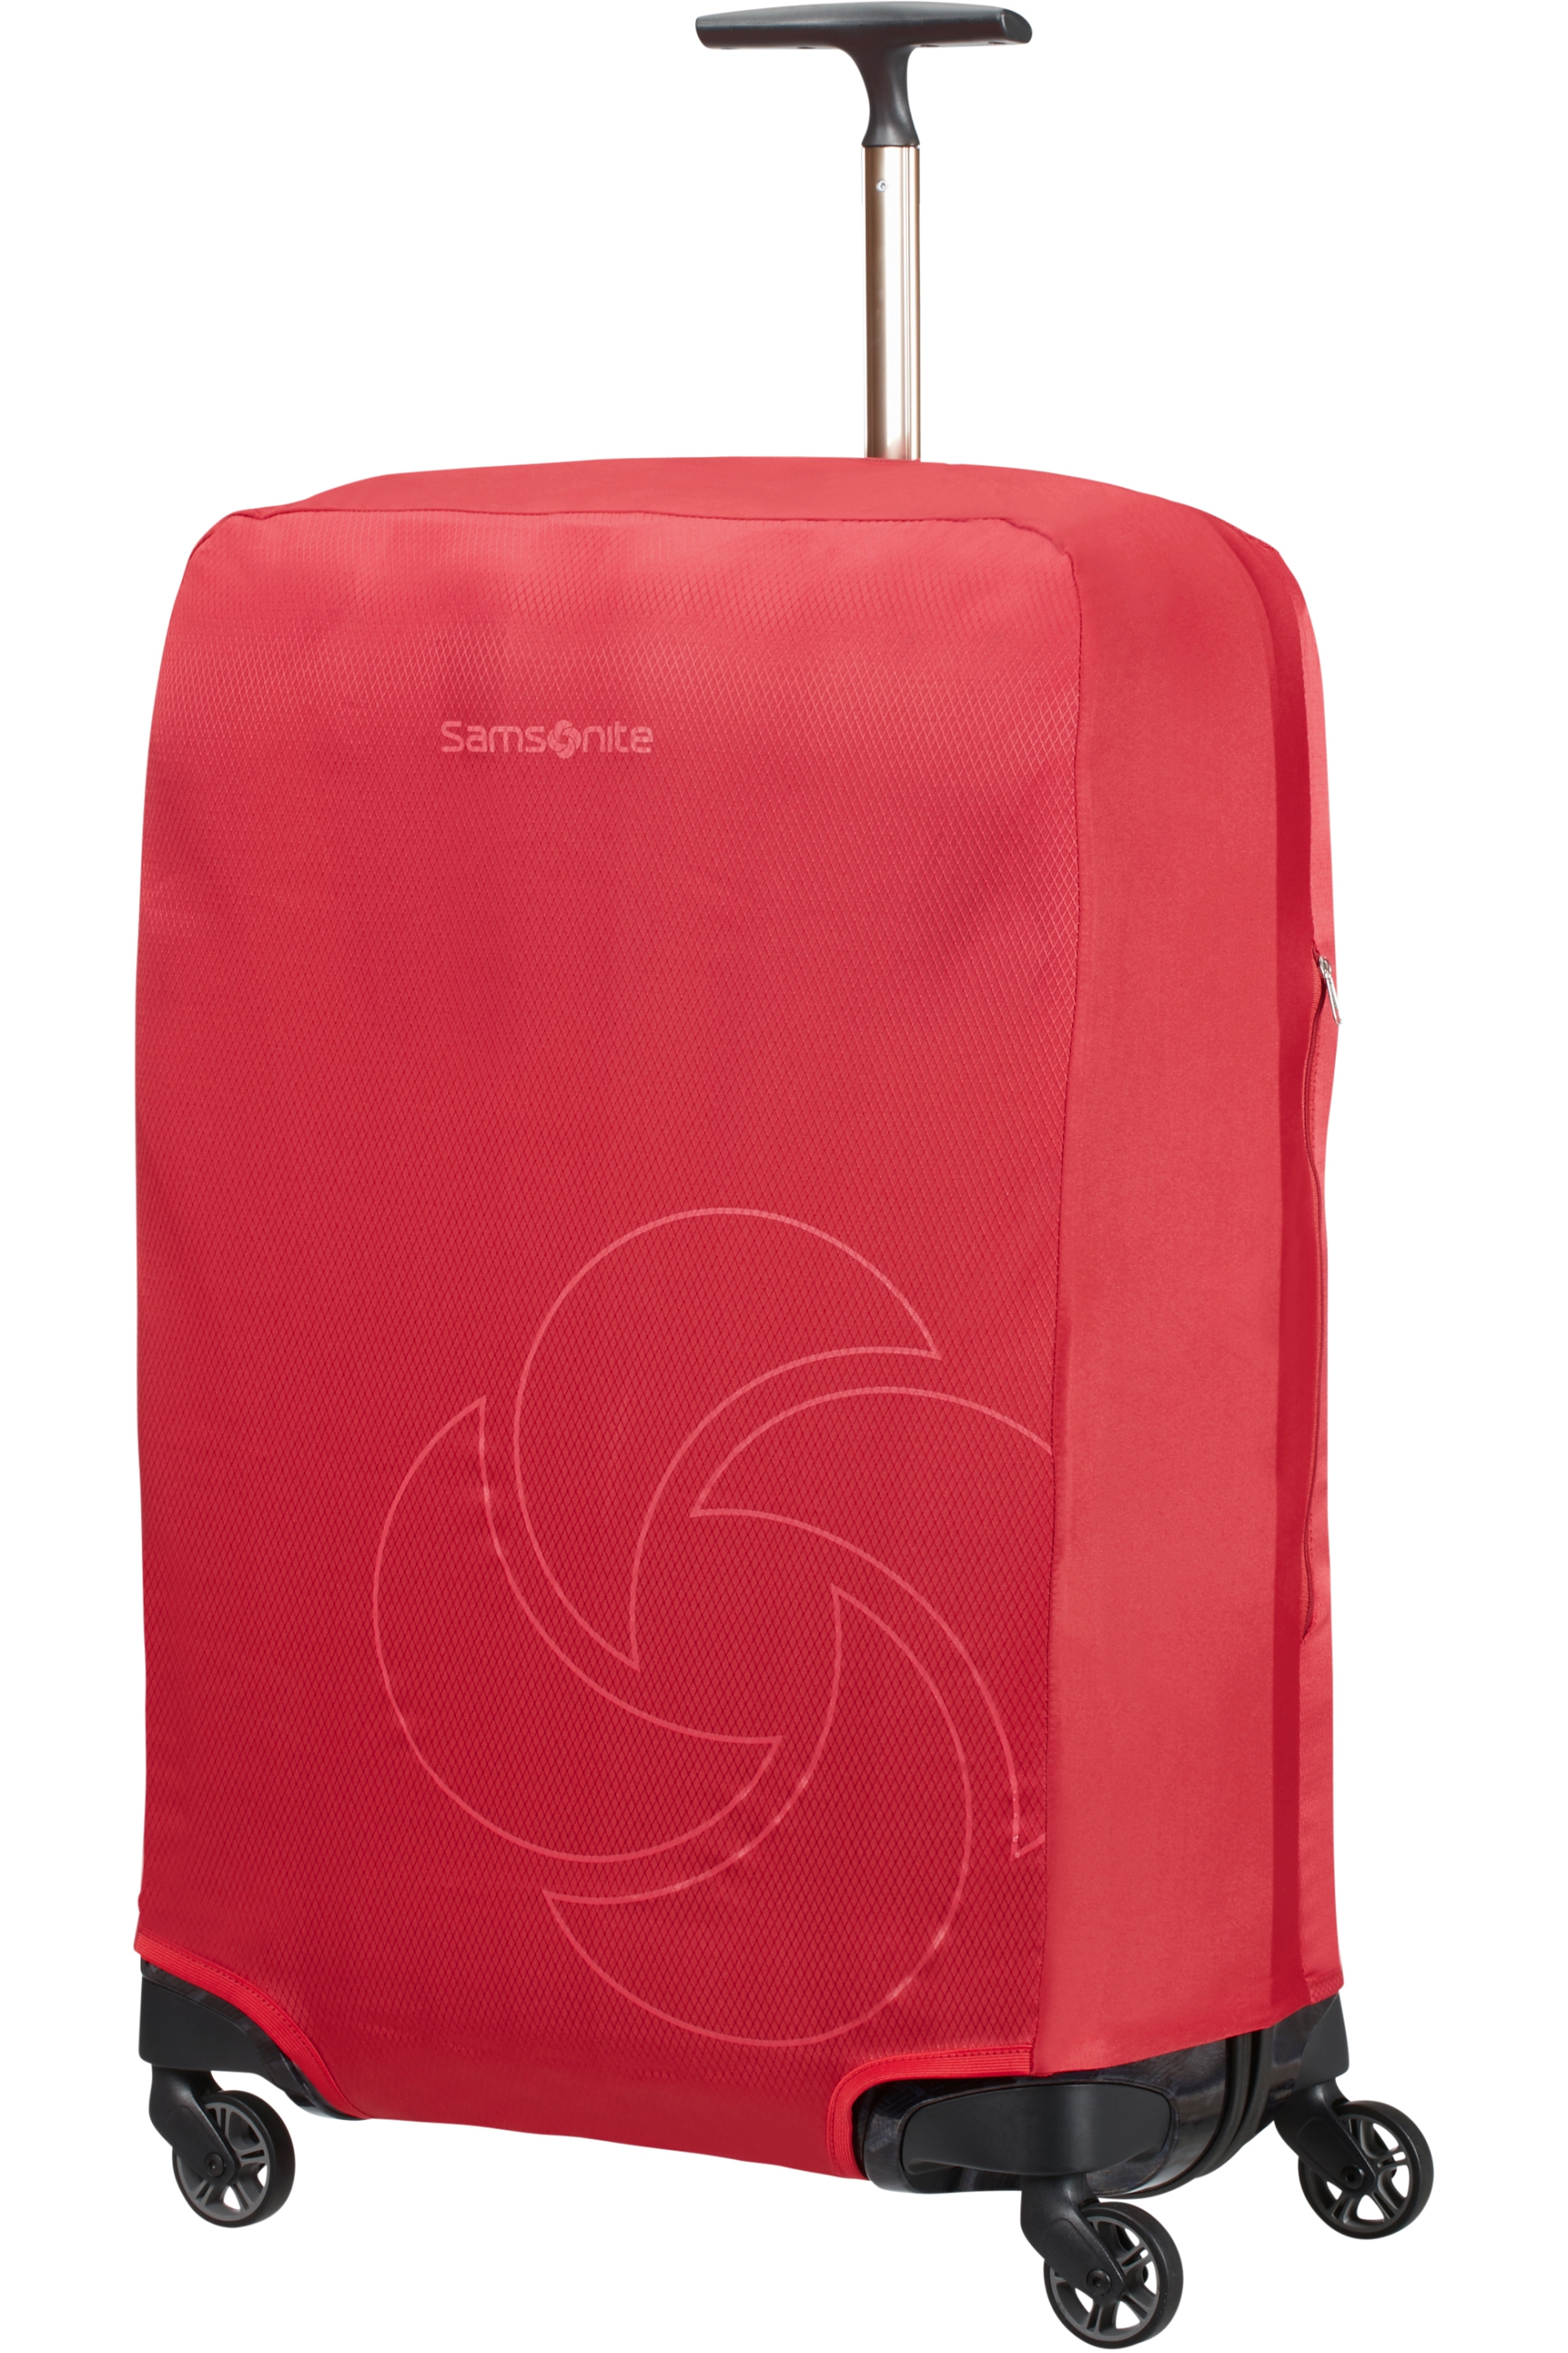 121224-1726-121224_1726_foldable_luggage_cover_m_front34-dbe717ed-1deb-44c8-8717-a9e6010a3843-jpg